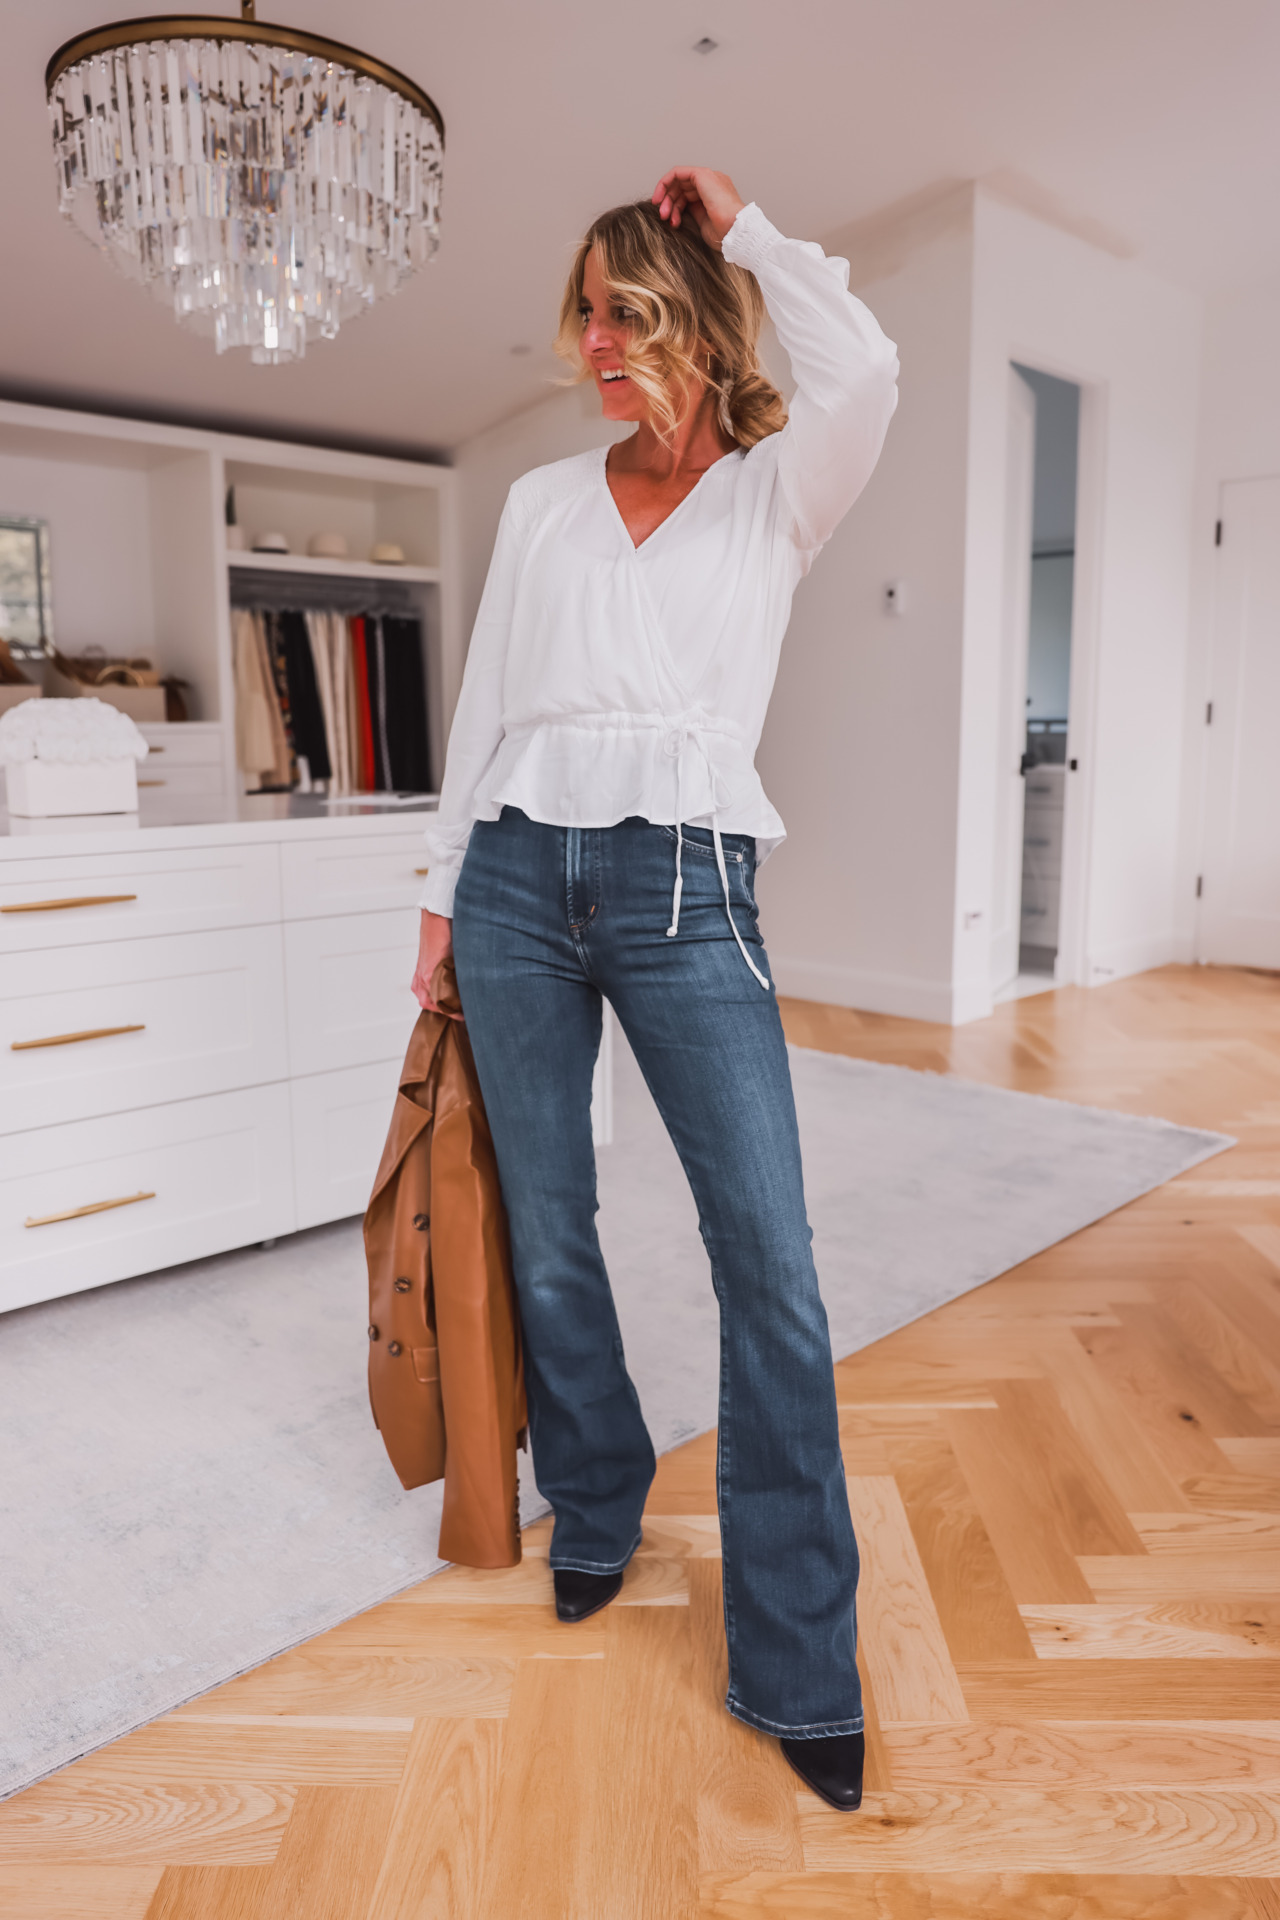 Cloth & Stone Wrap Blouse | Fall Tops With Jeans